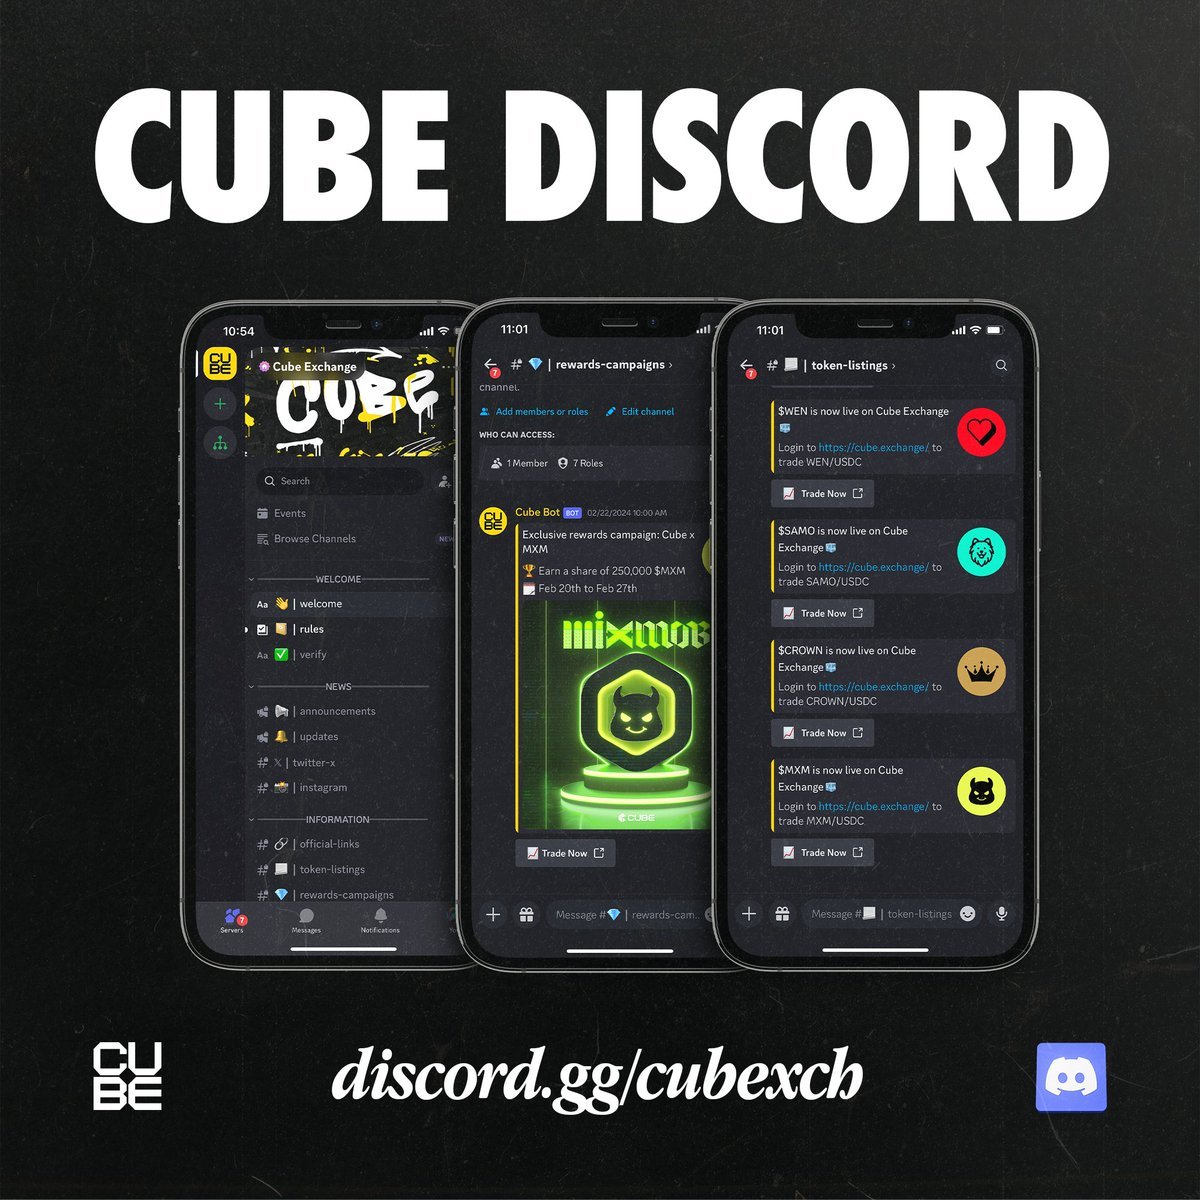 Have you joined the @cubexch Discord yet anon?👀 Be the first to know: Token Listings 💻 Reward Campaigns 💰 Product & Feature Updates 🛠️ Join below 👇 discord.gg/cubexch